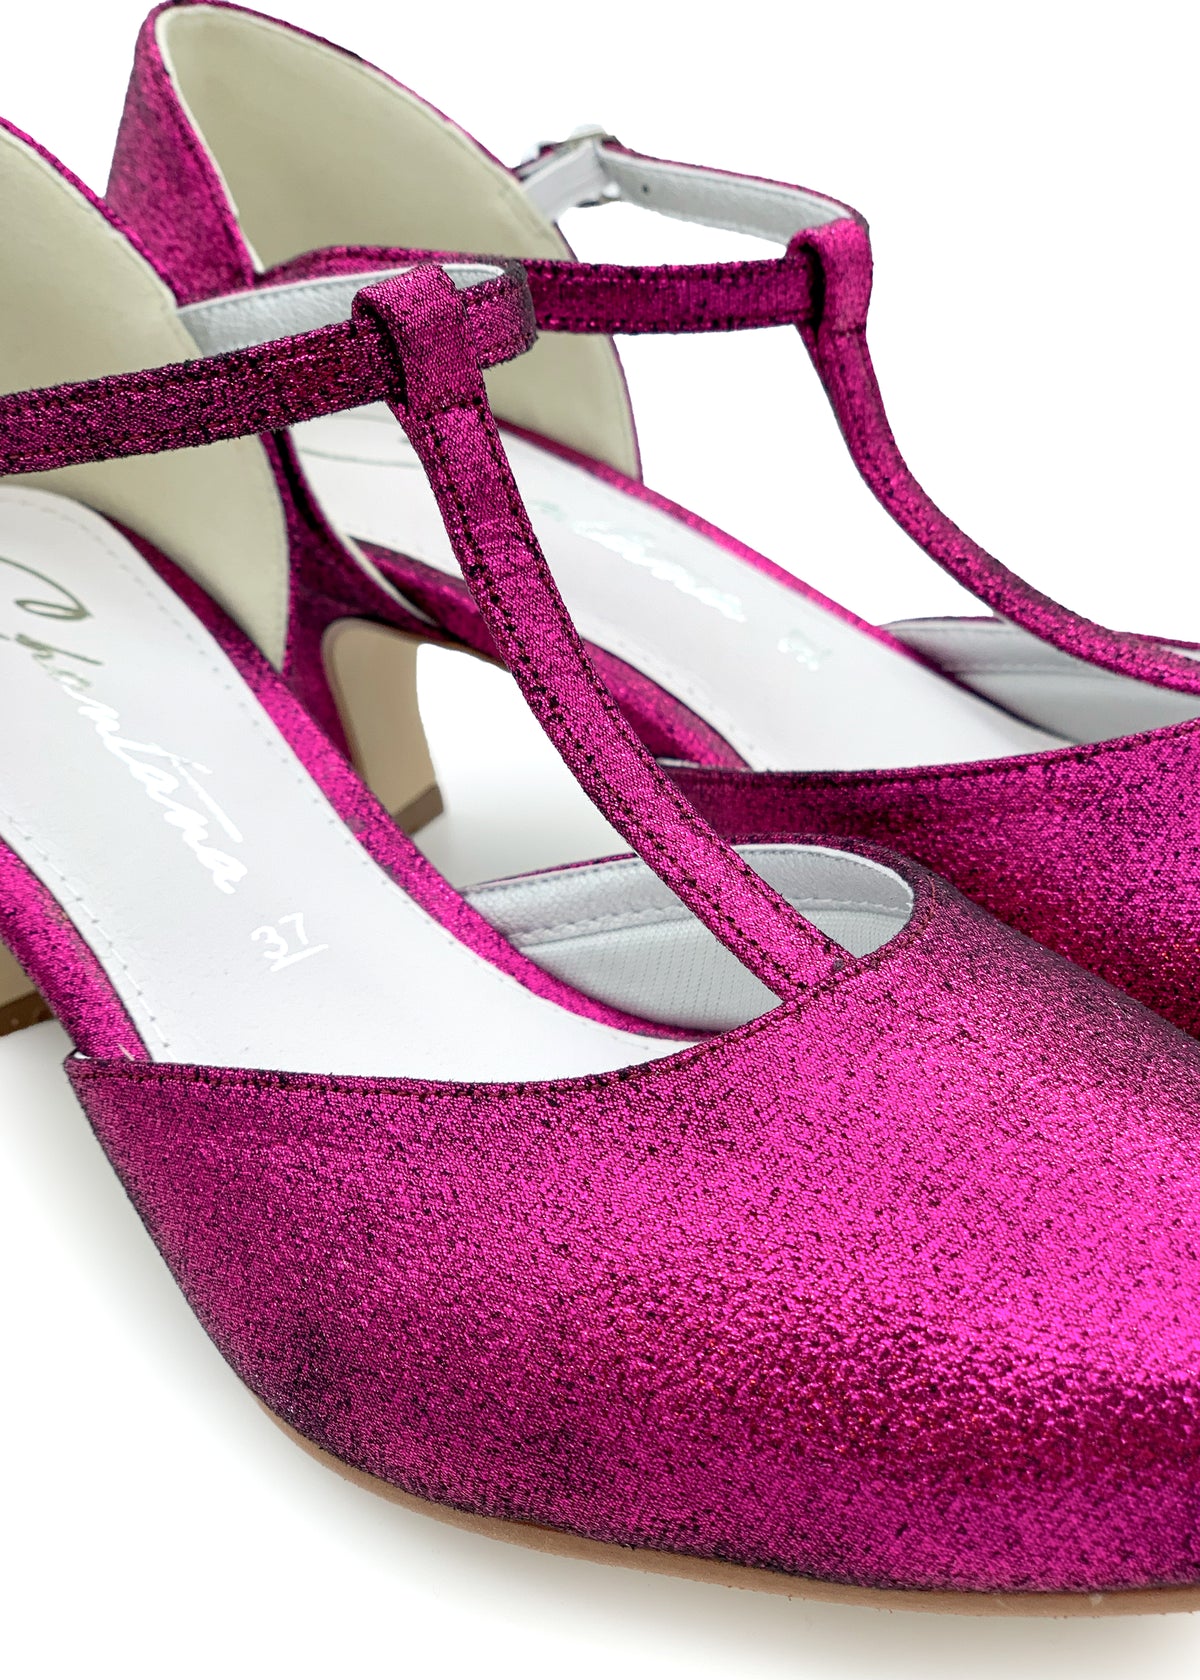 Open-toed shoes with ankle straps - sparkling pink